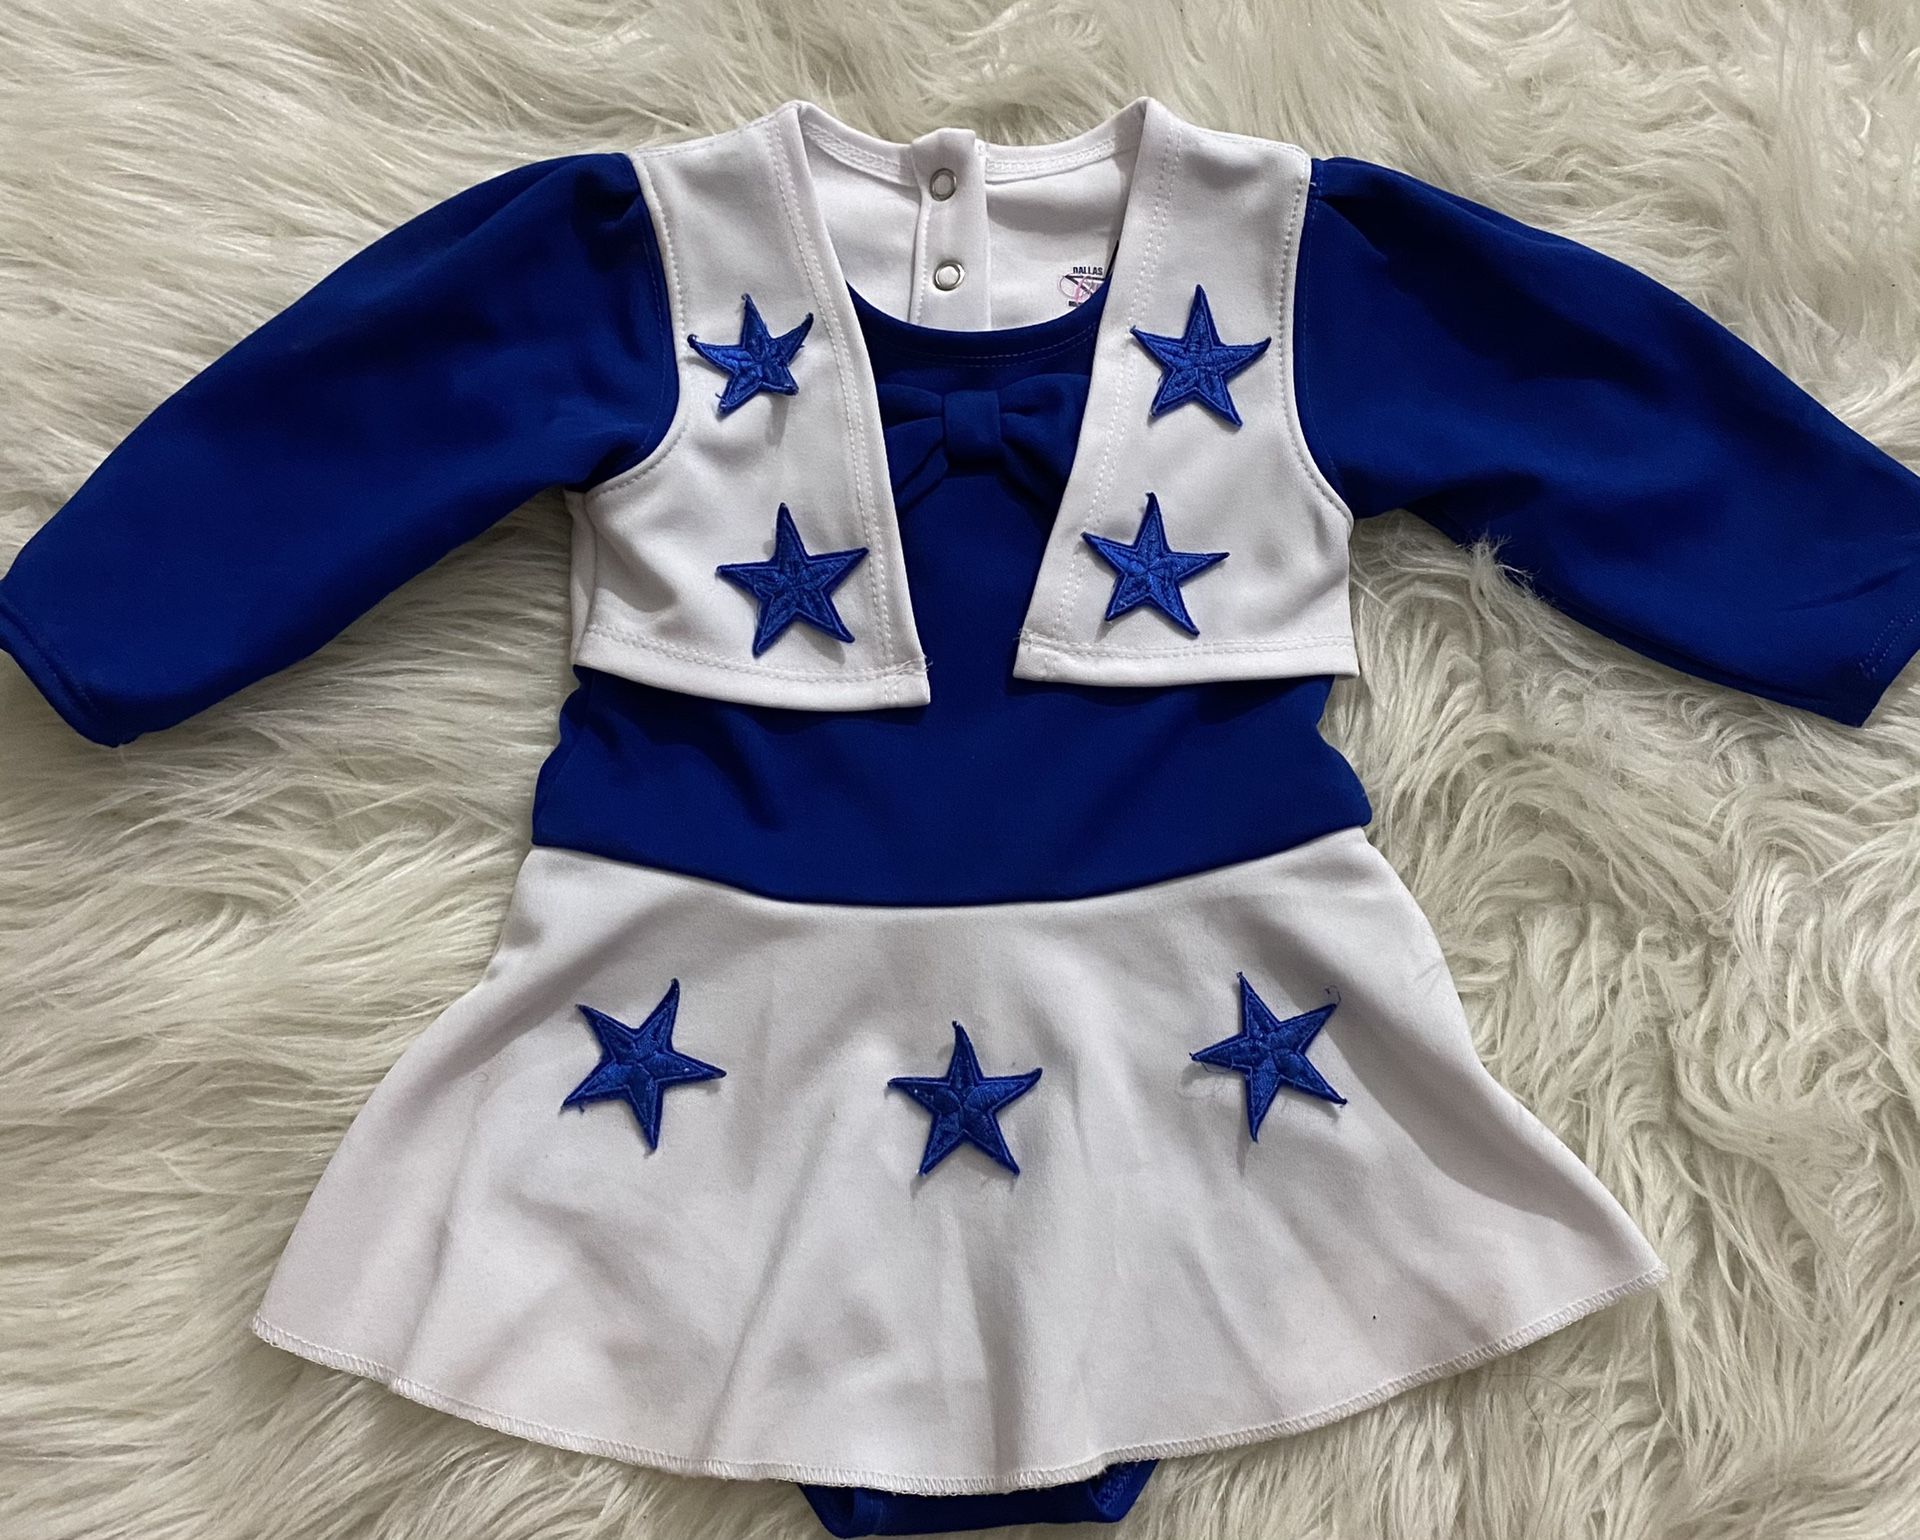 Dallas Cowboys Cheerleading Outfit - 12 months